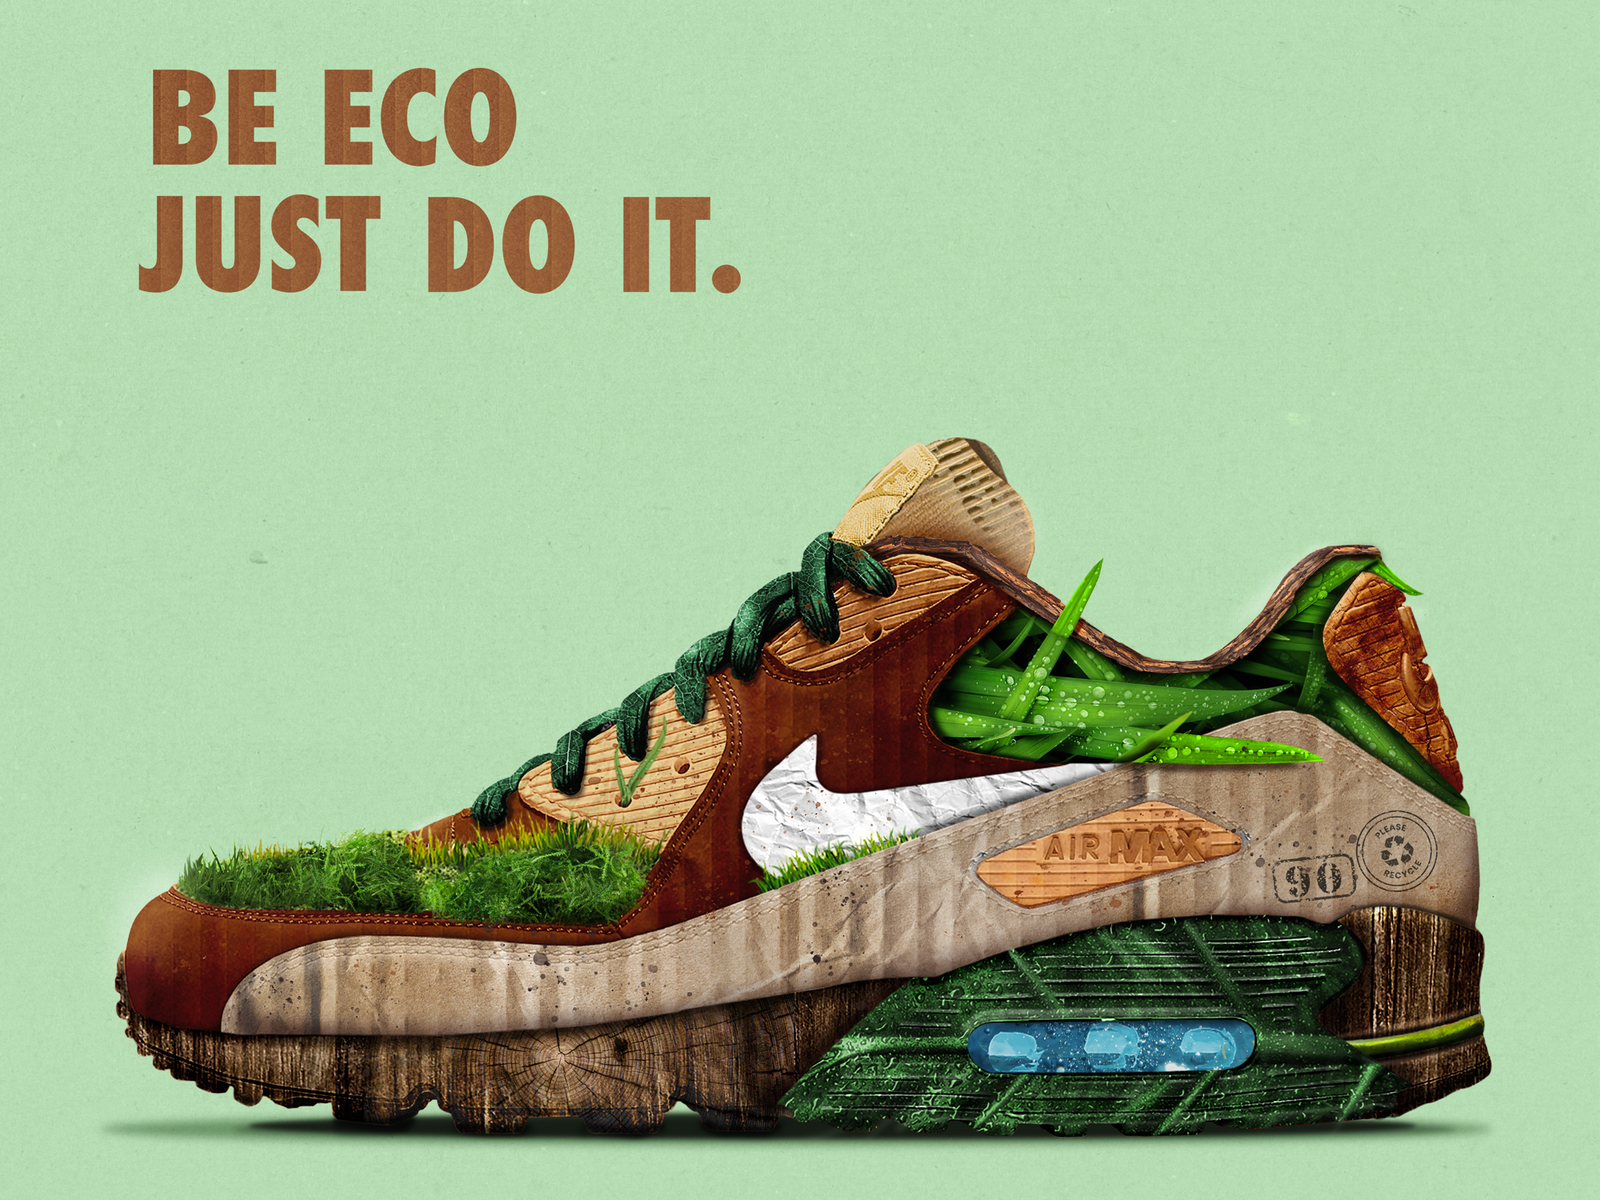 Eco Nike Air Max 90 by Michal Ruchel on 